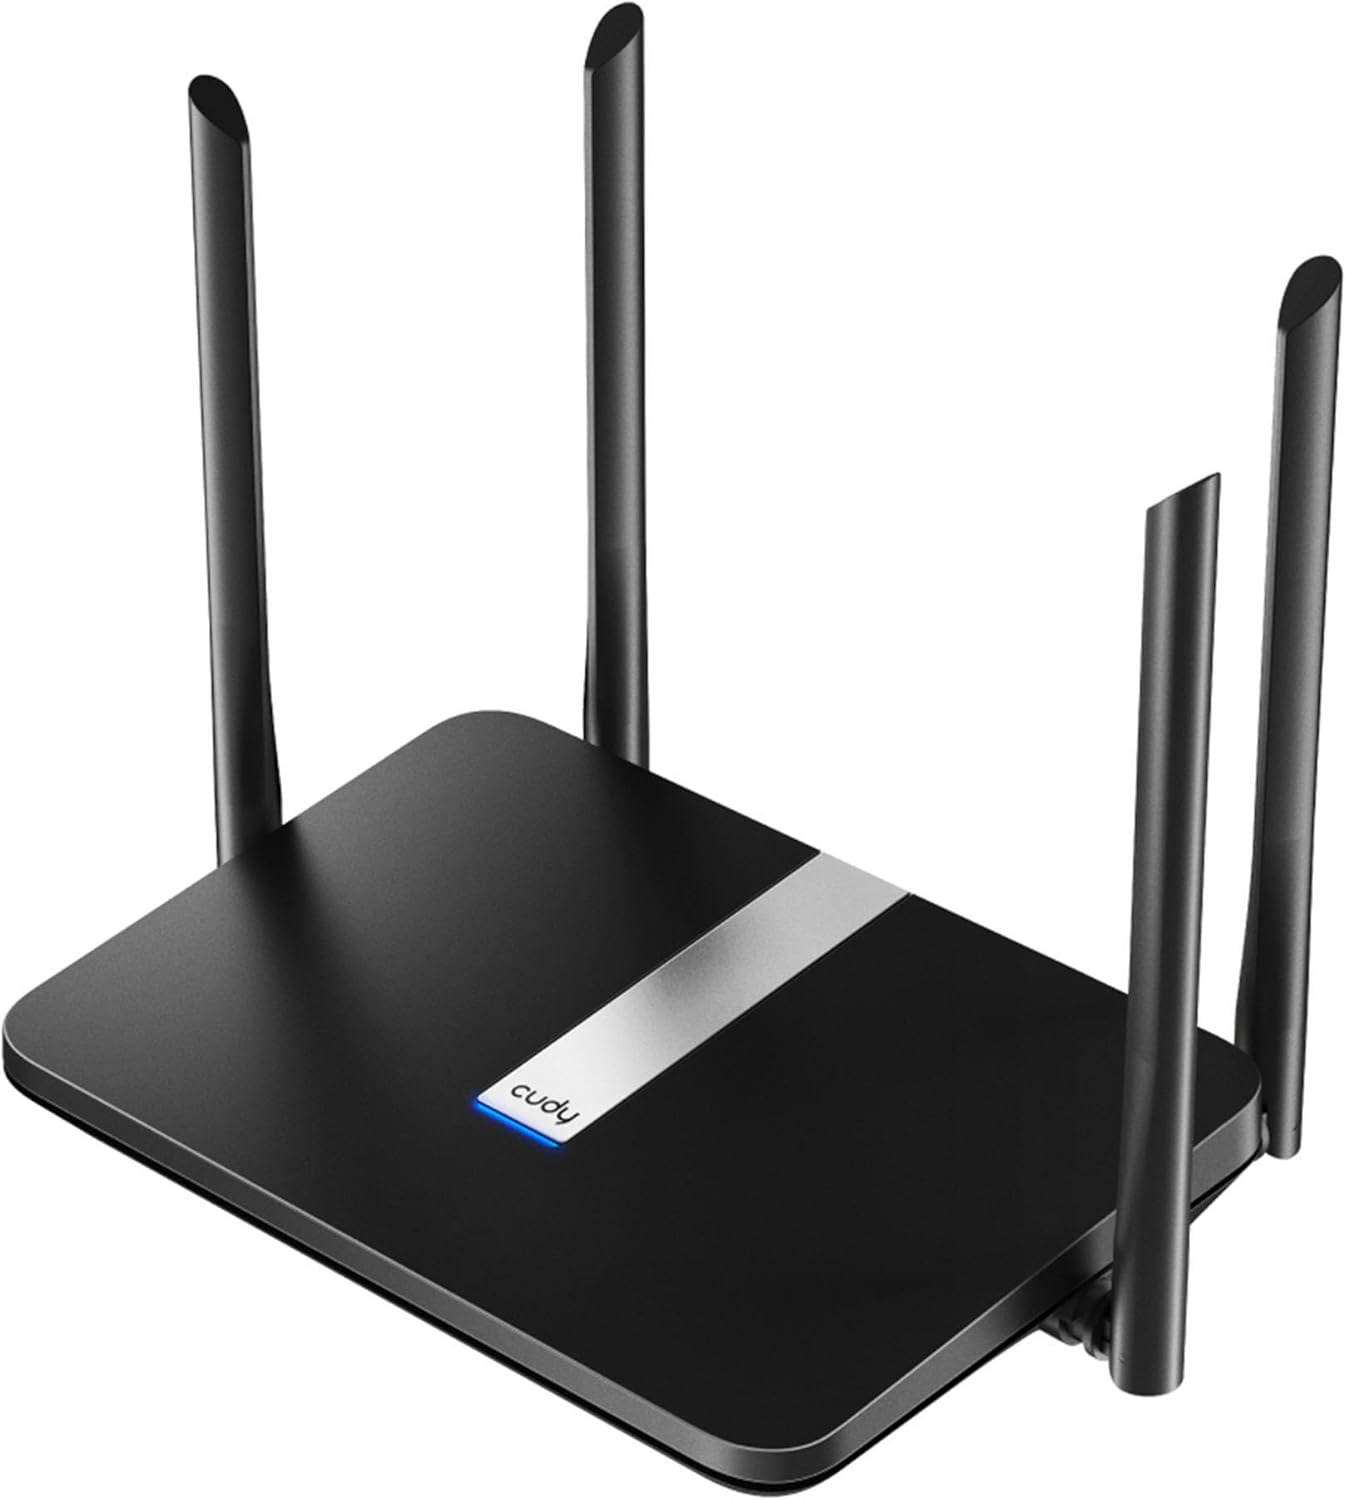 Cudy New AX 1800Mbps WiFi 6 Mesh Router, AX1800 2.4G 5G Gigabit Wireless Router